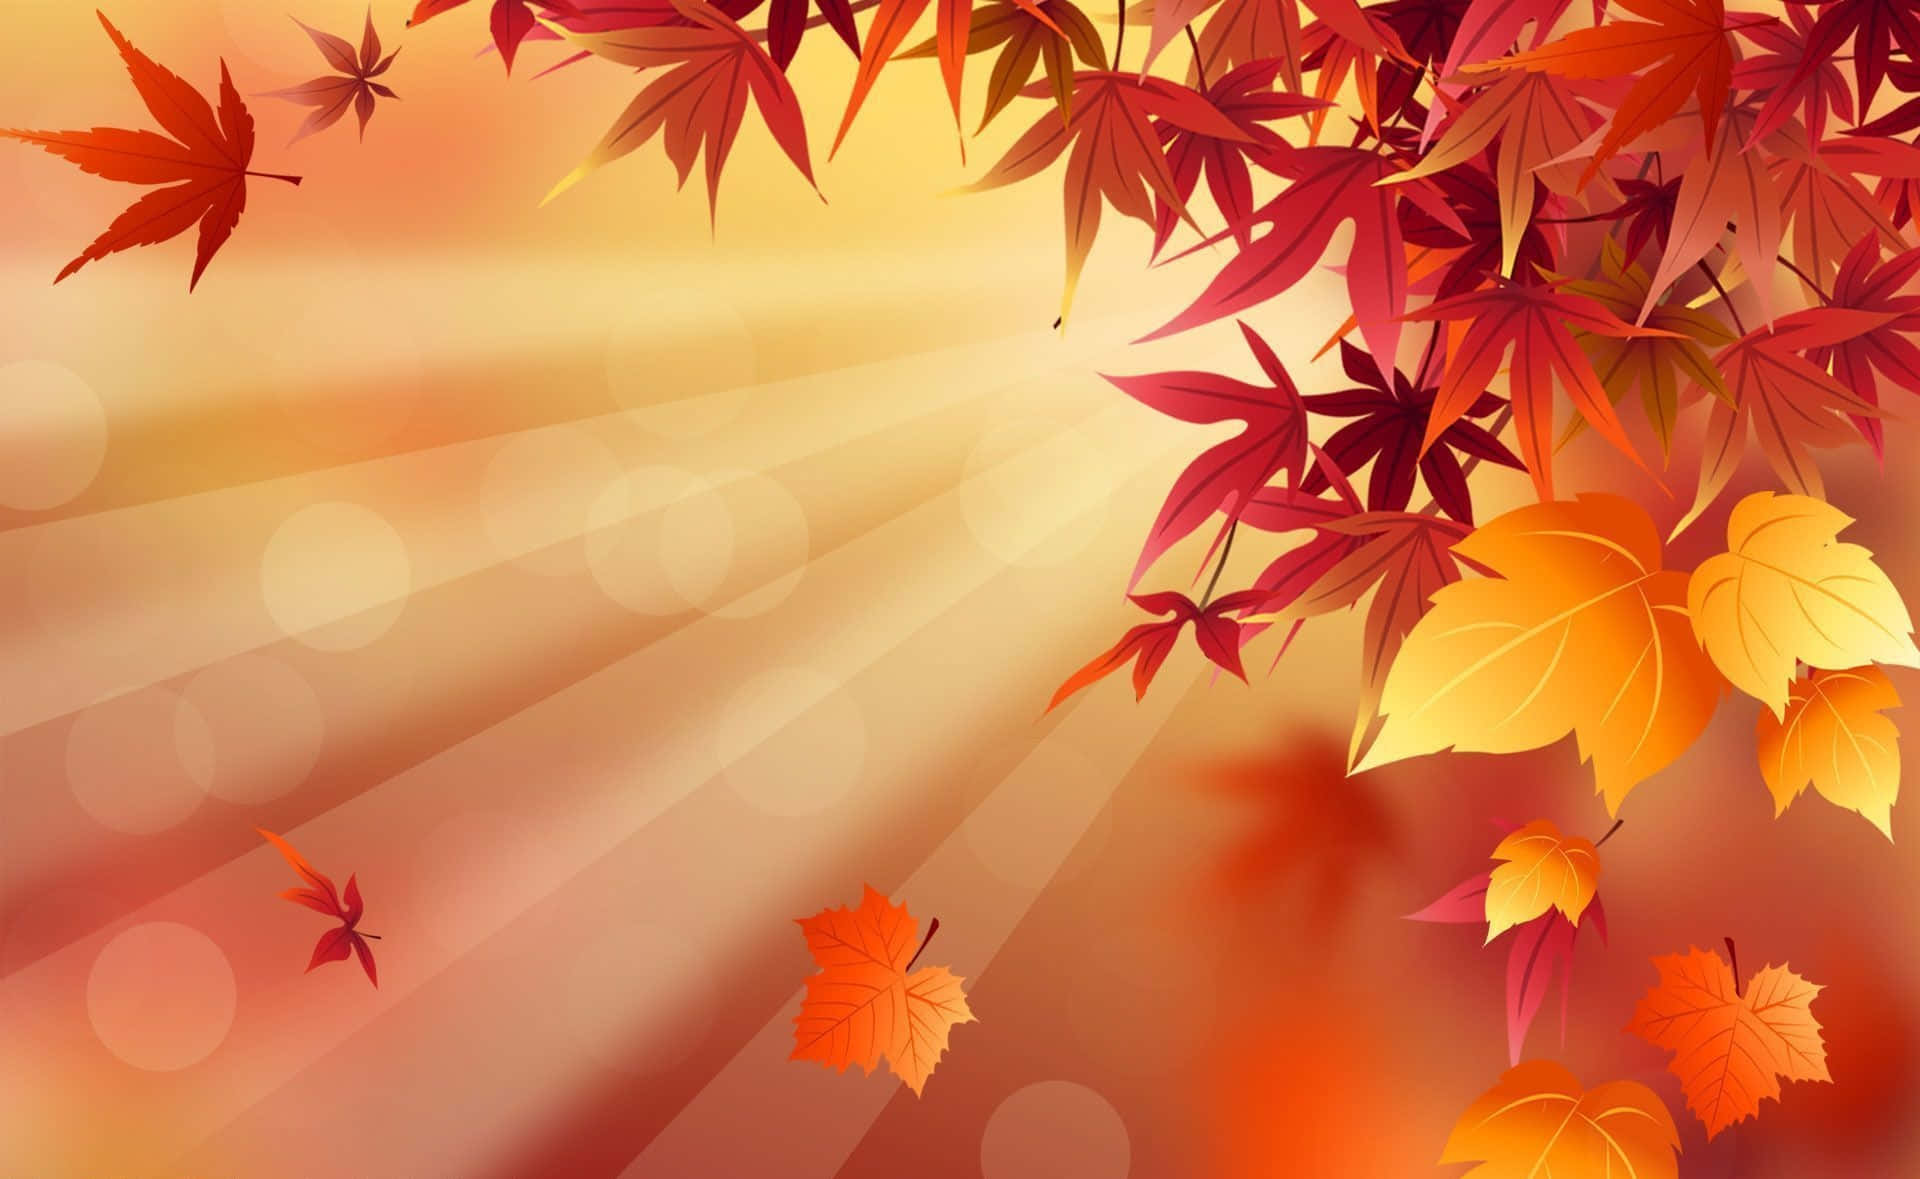 Welcome the season of autumn with this adorable desktop wallpaper Wallpaper